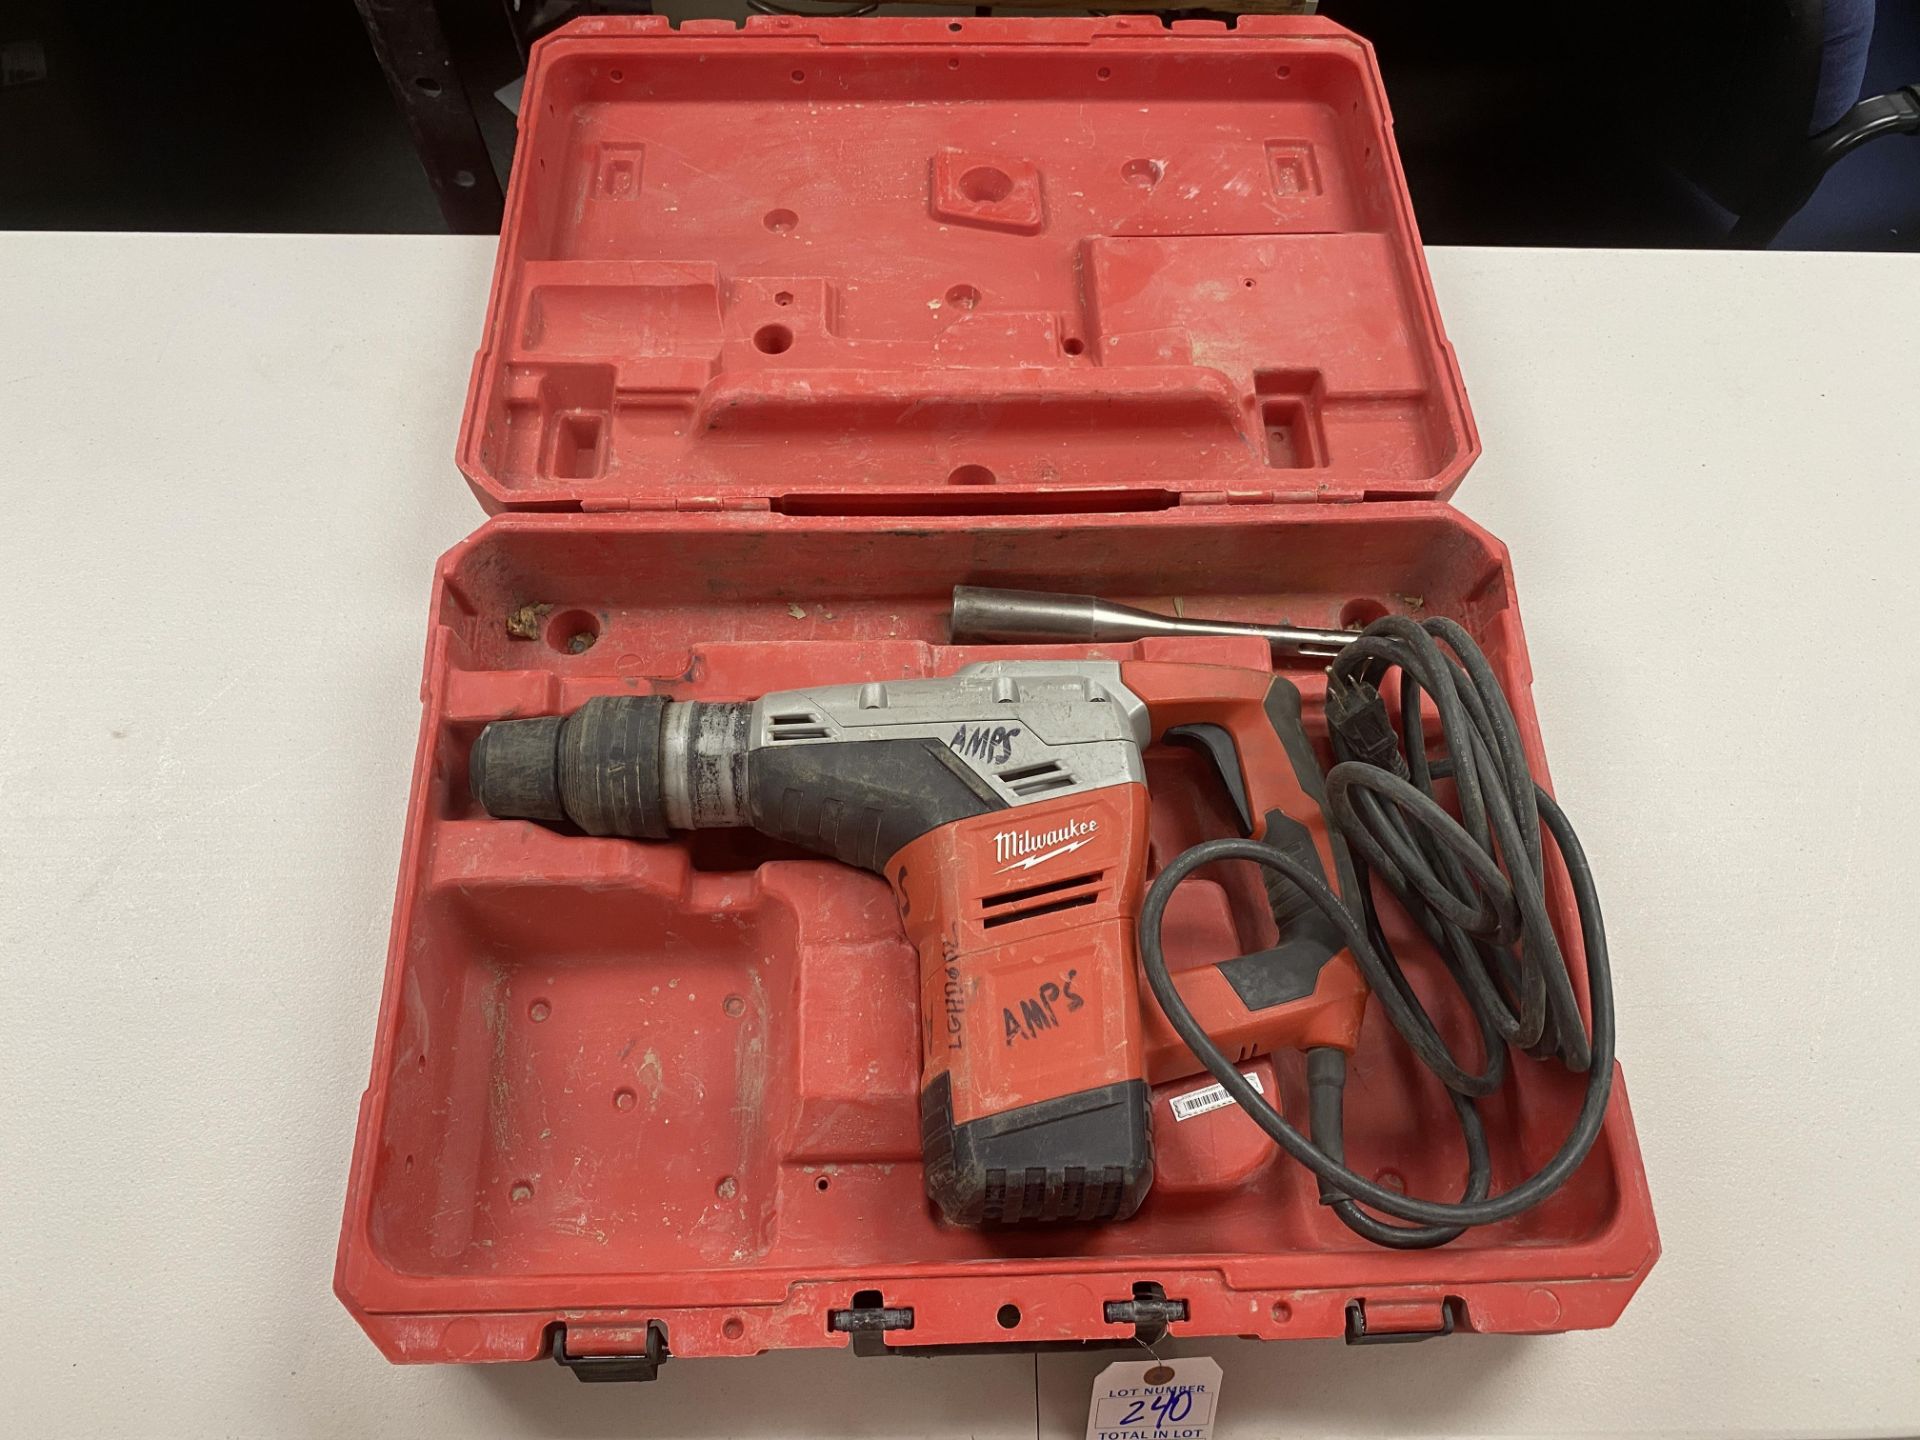 Milwaukee Corded 1-9/16" SDS Max Rotary Hammer w/ Case #5317-20